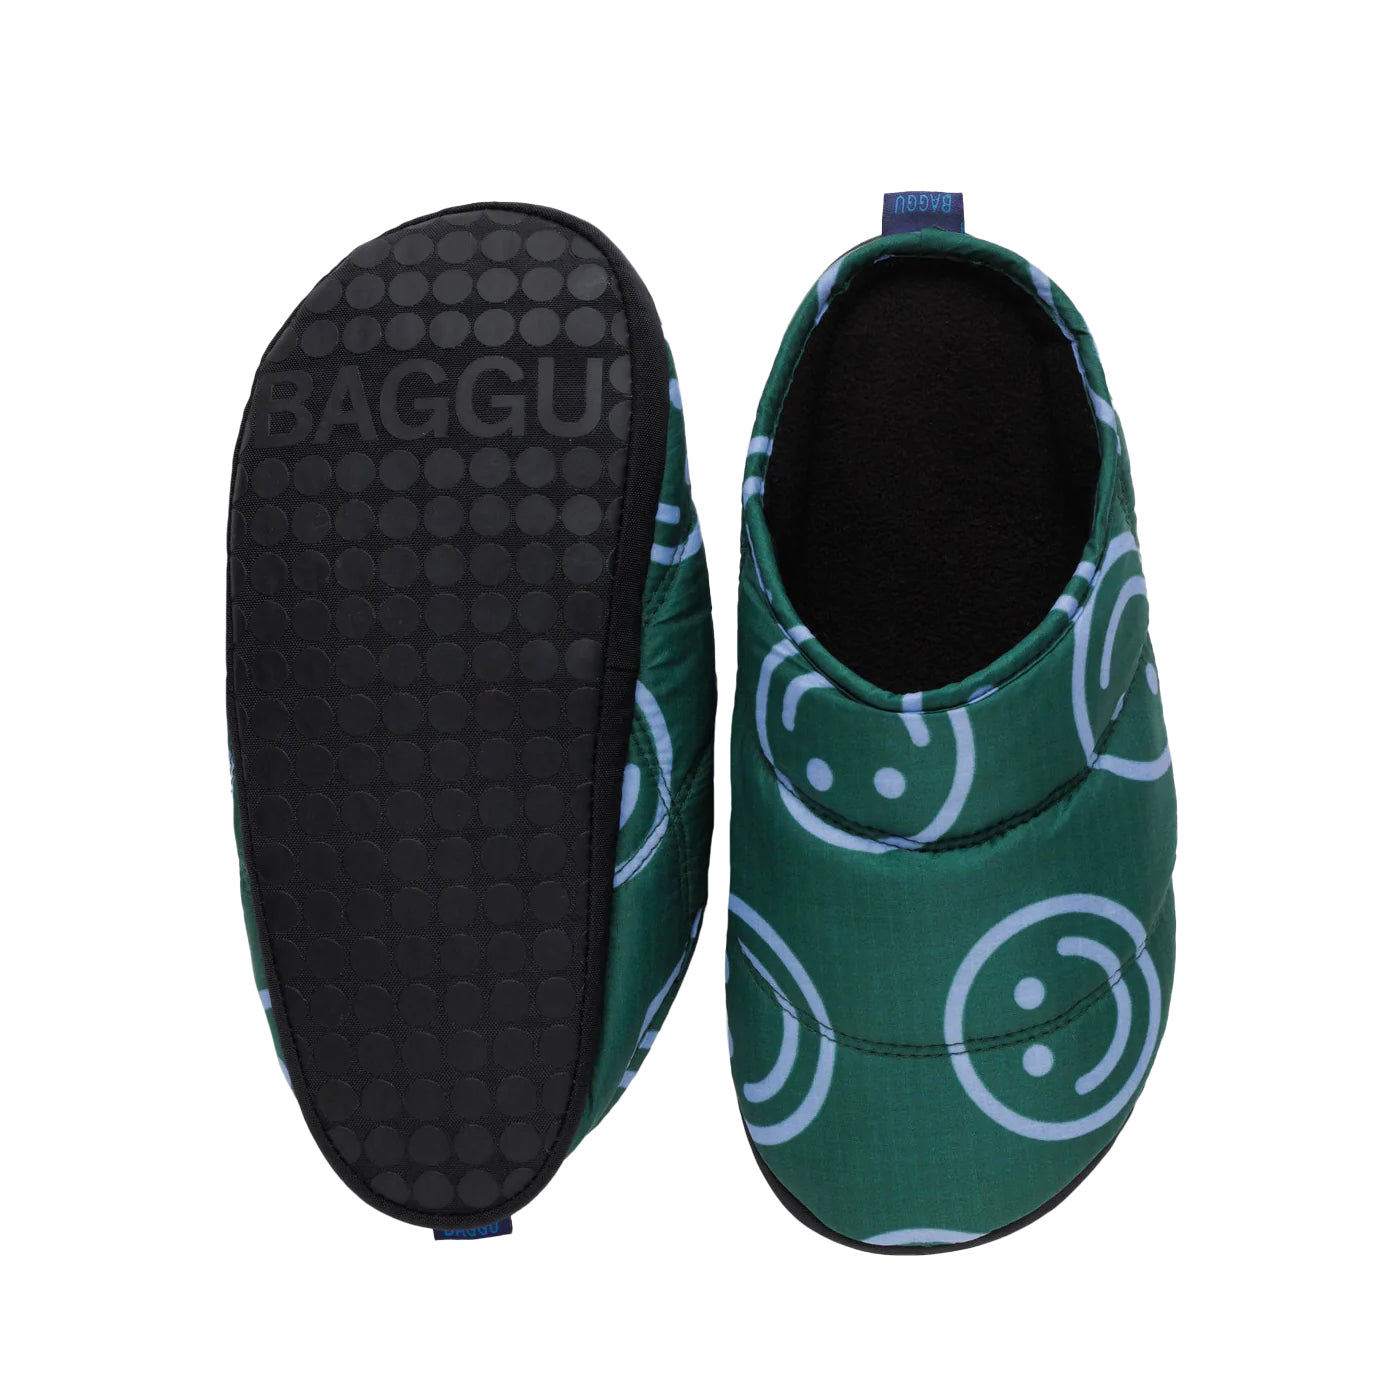 Puffy BAGGU Slippers - Forest Happy